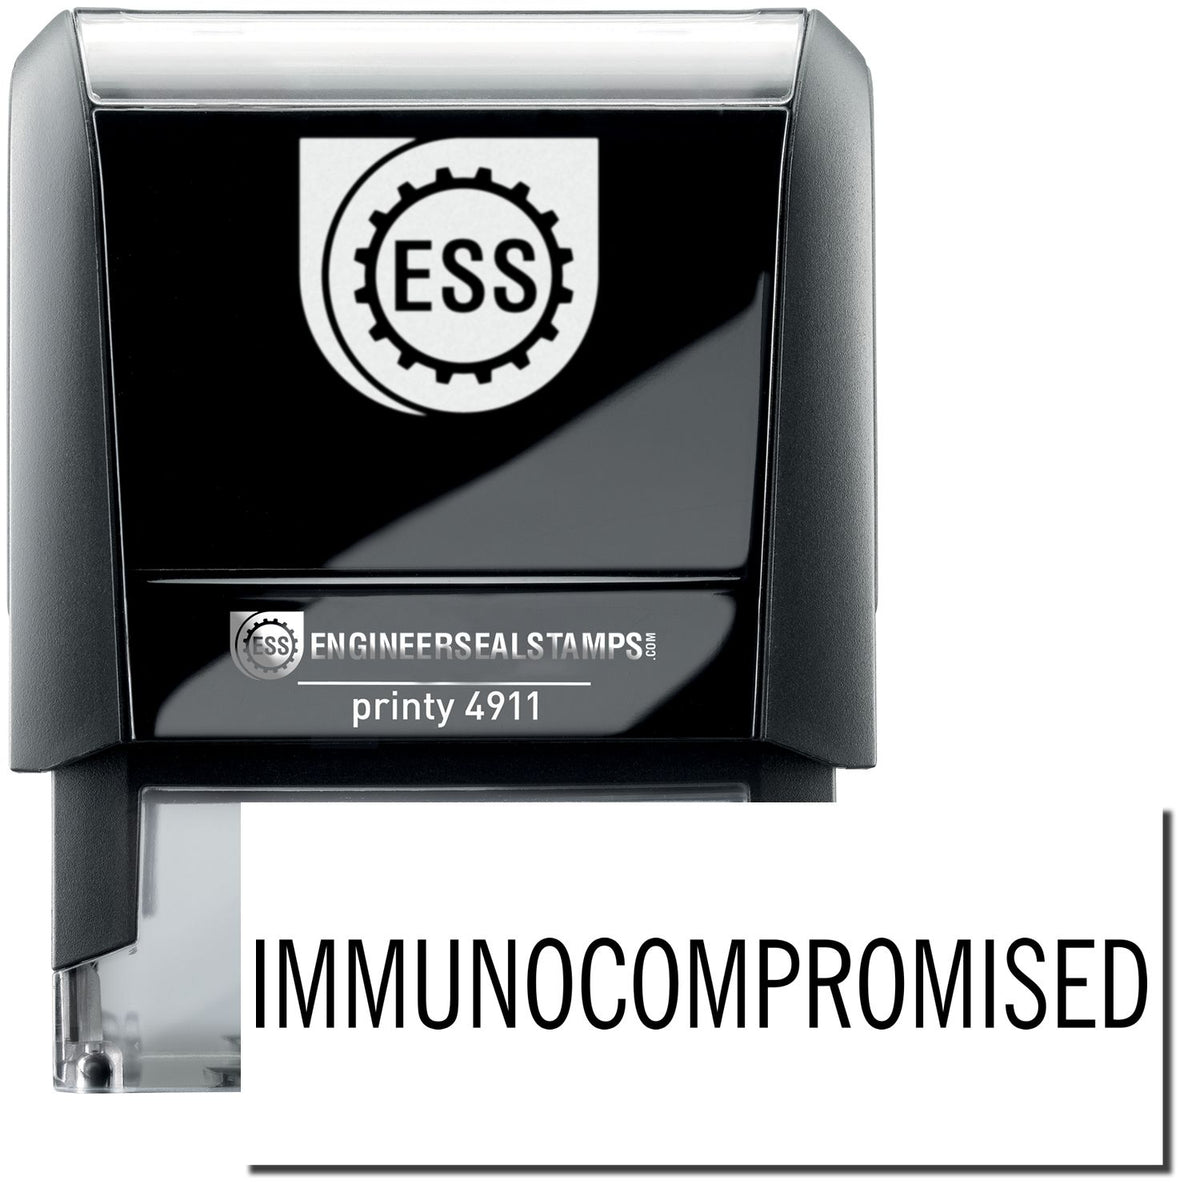 A self-inking stamp with a stamped image showing how the text &quot;IMMUNOCOMPROMISED&quot; is displayed after stamping.